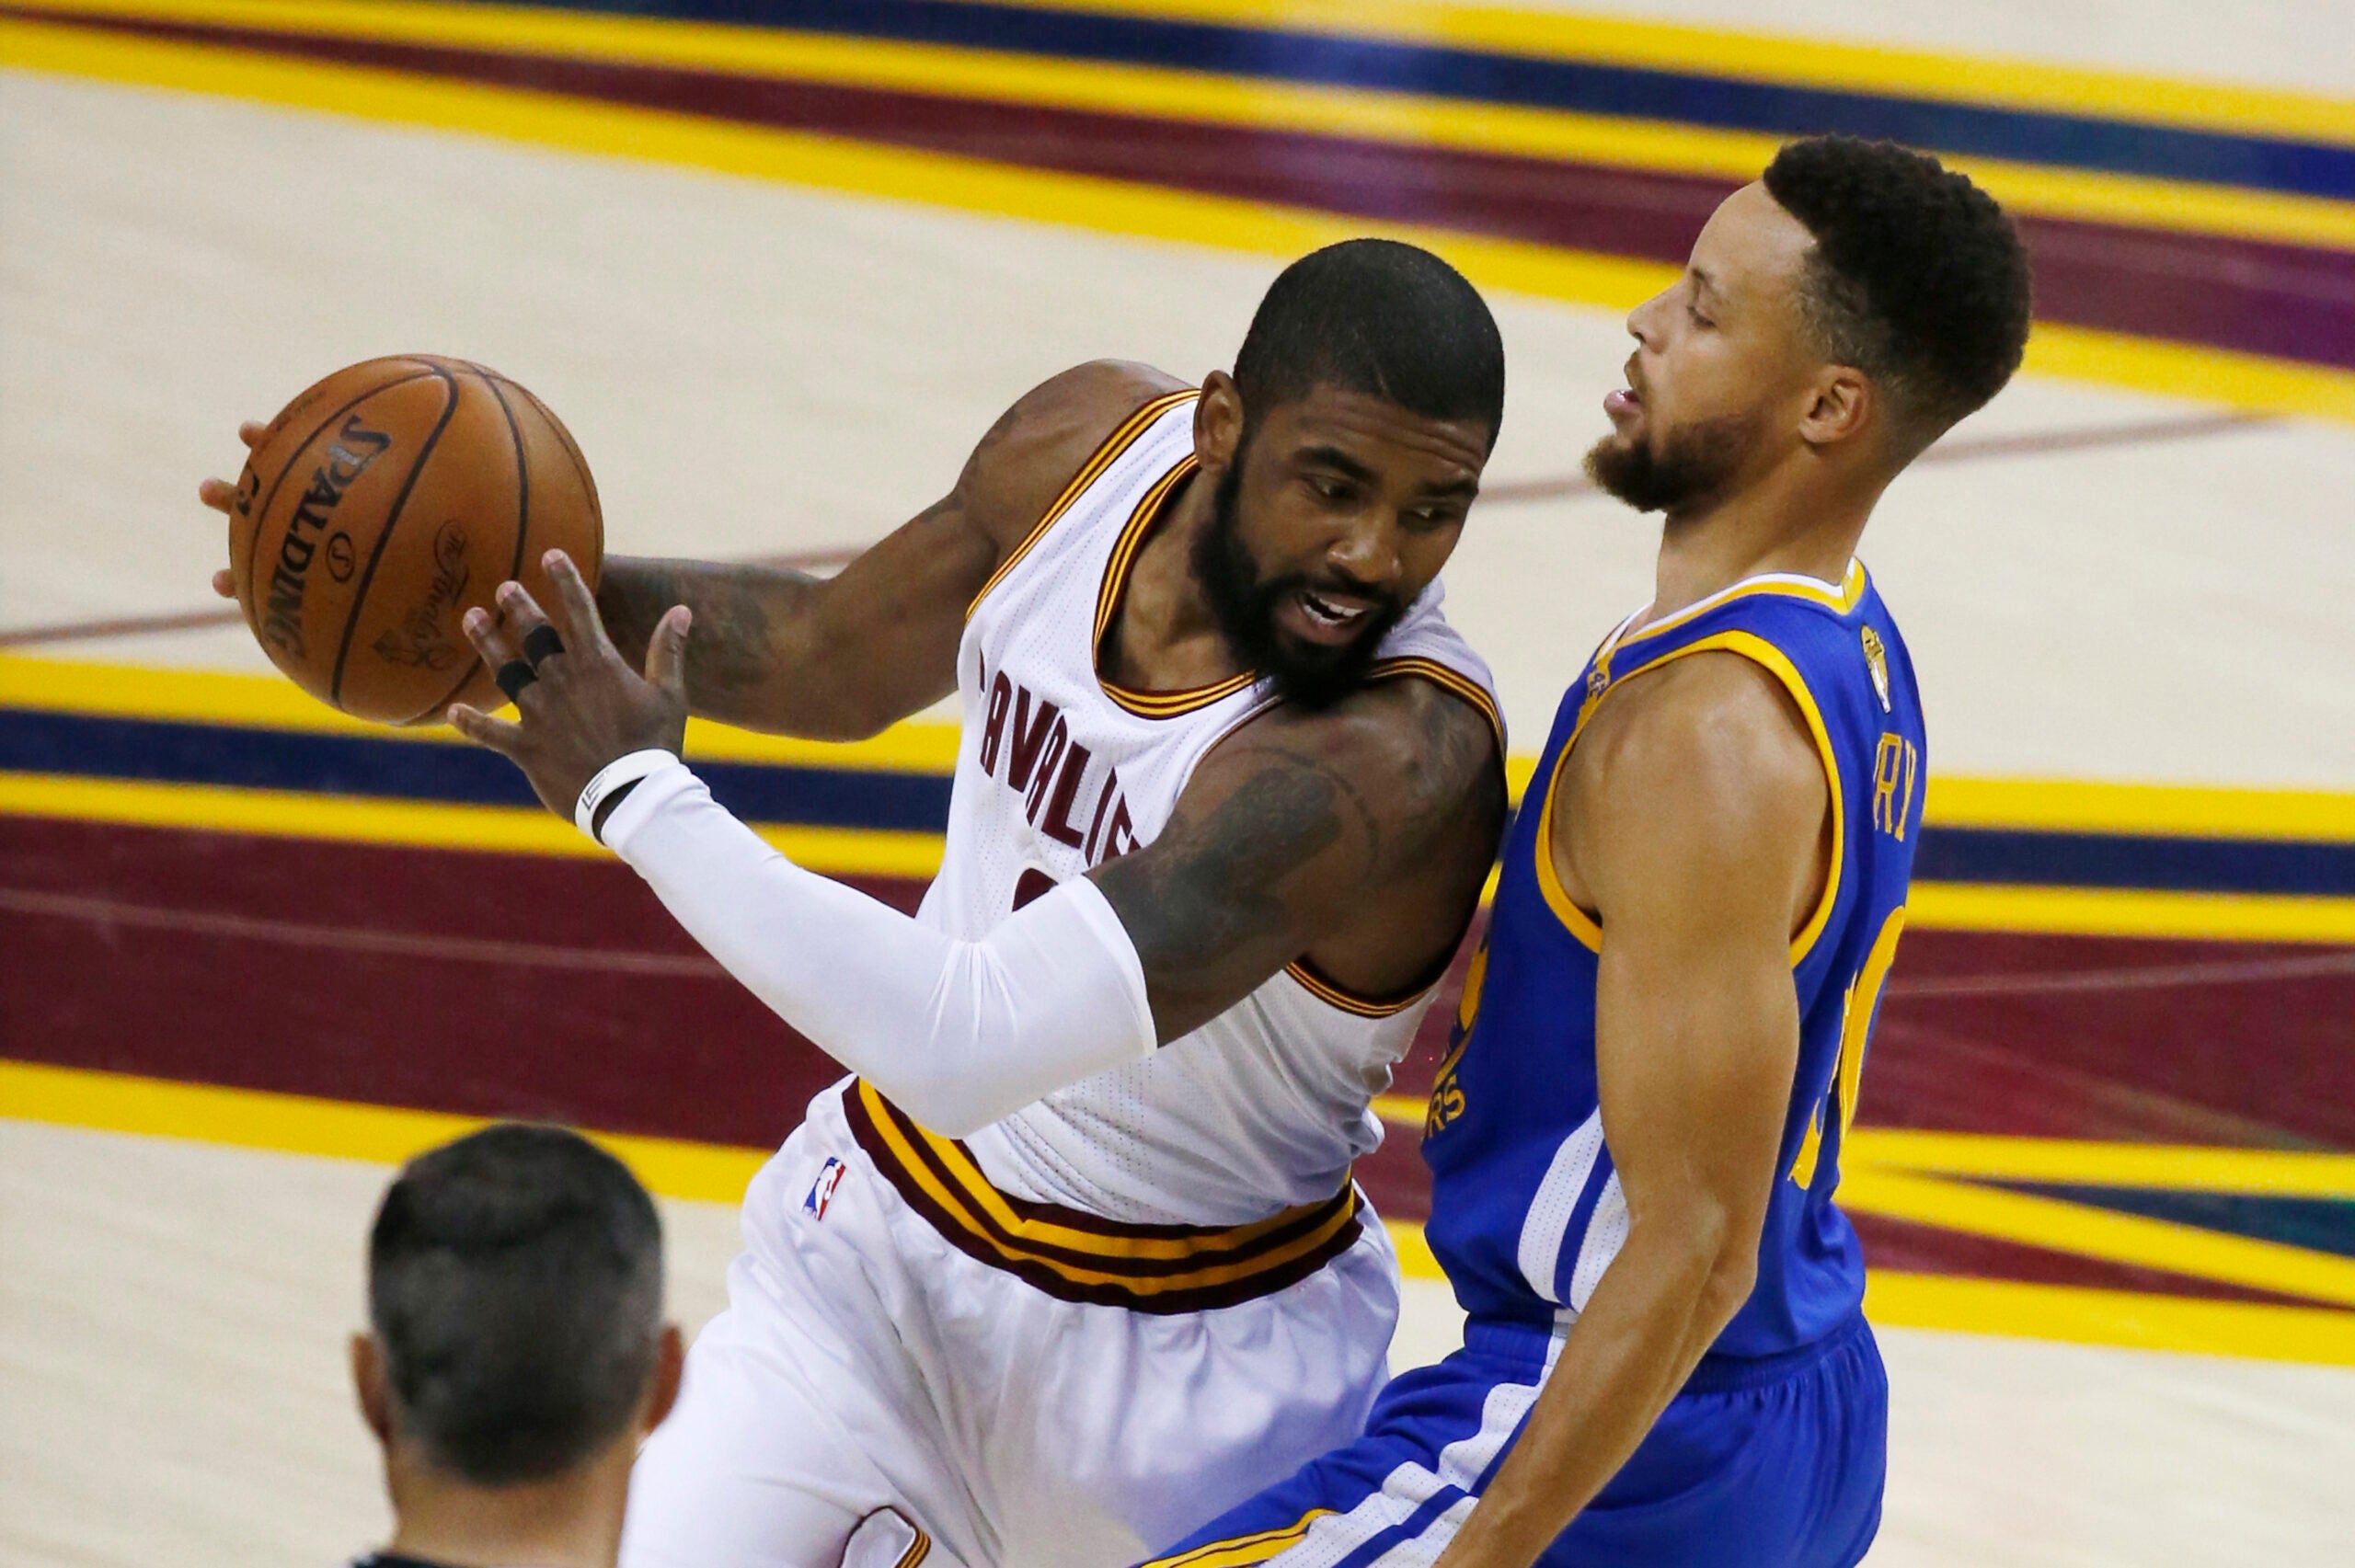 Kyrie Irving convinced middle school students the world is flat